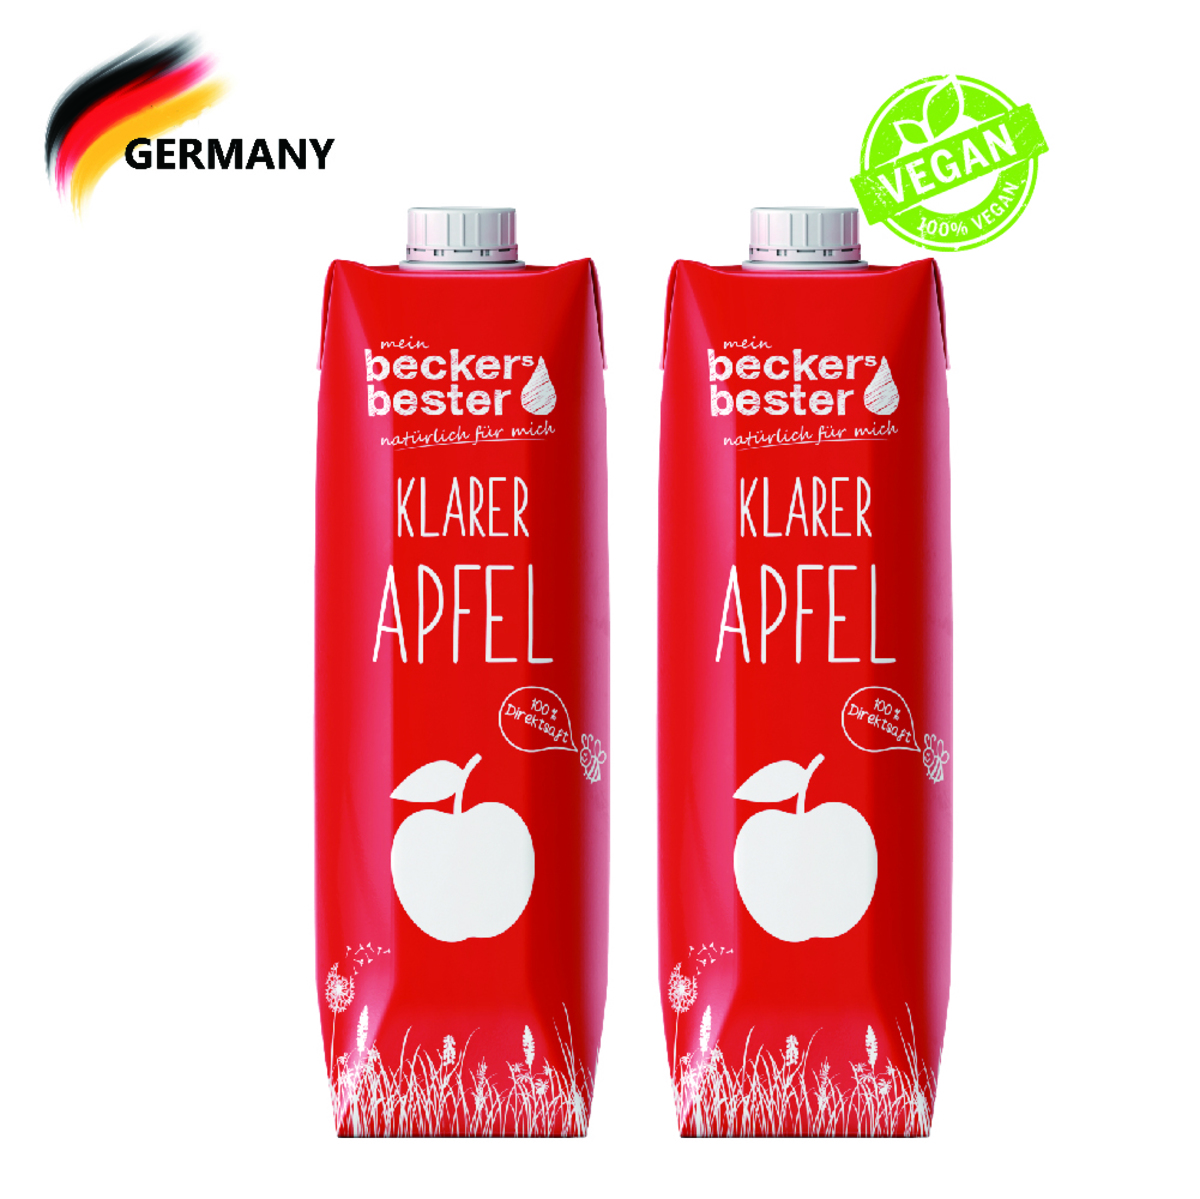 100% Direct Pressed Clear Apple Juice (Not-From-Concentrate) 1L x2